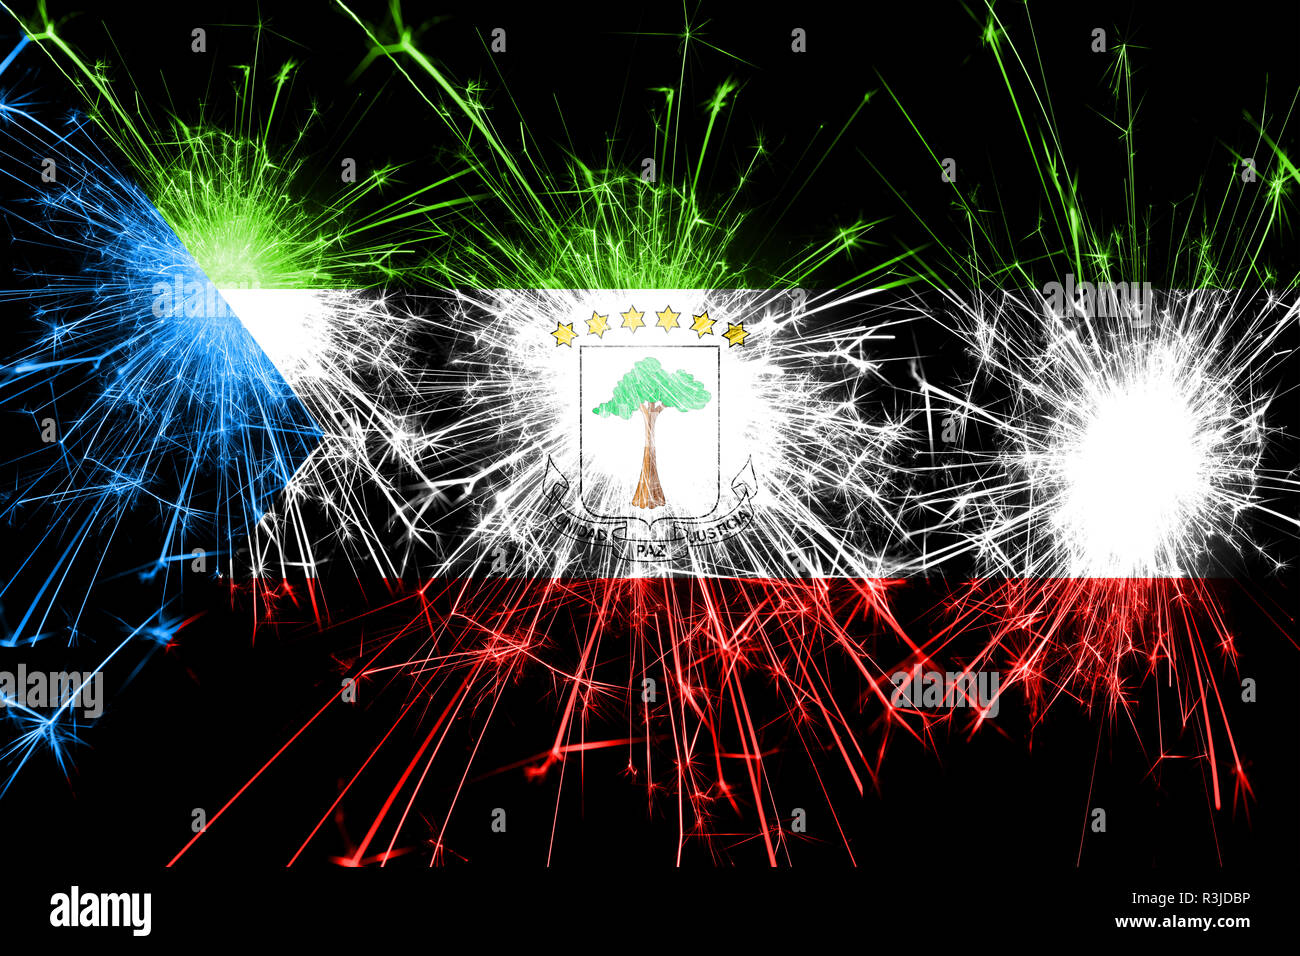 Equatorial Guinea fireworks sparkling flag. New Year, Christmas and National day concept Stock Photo